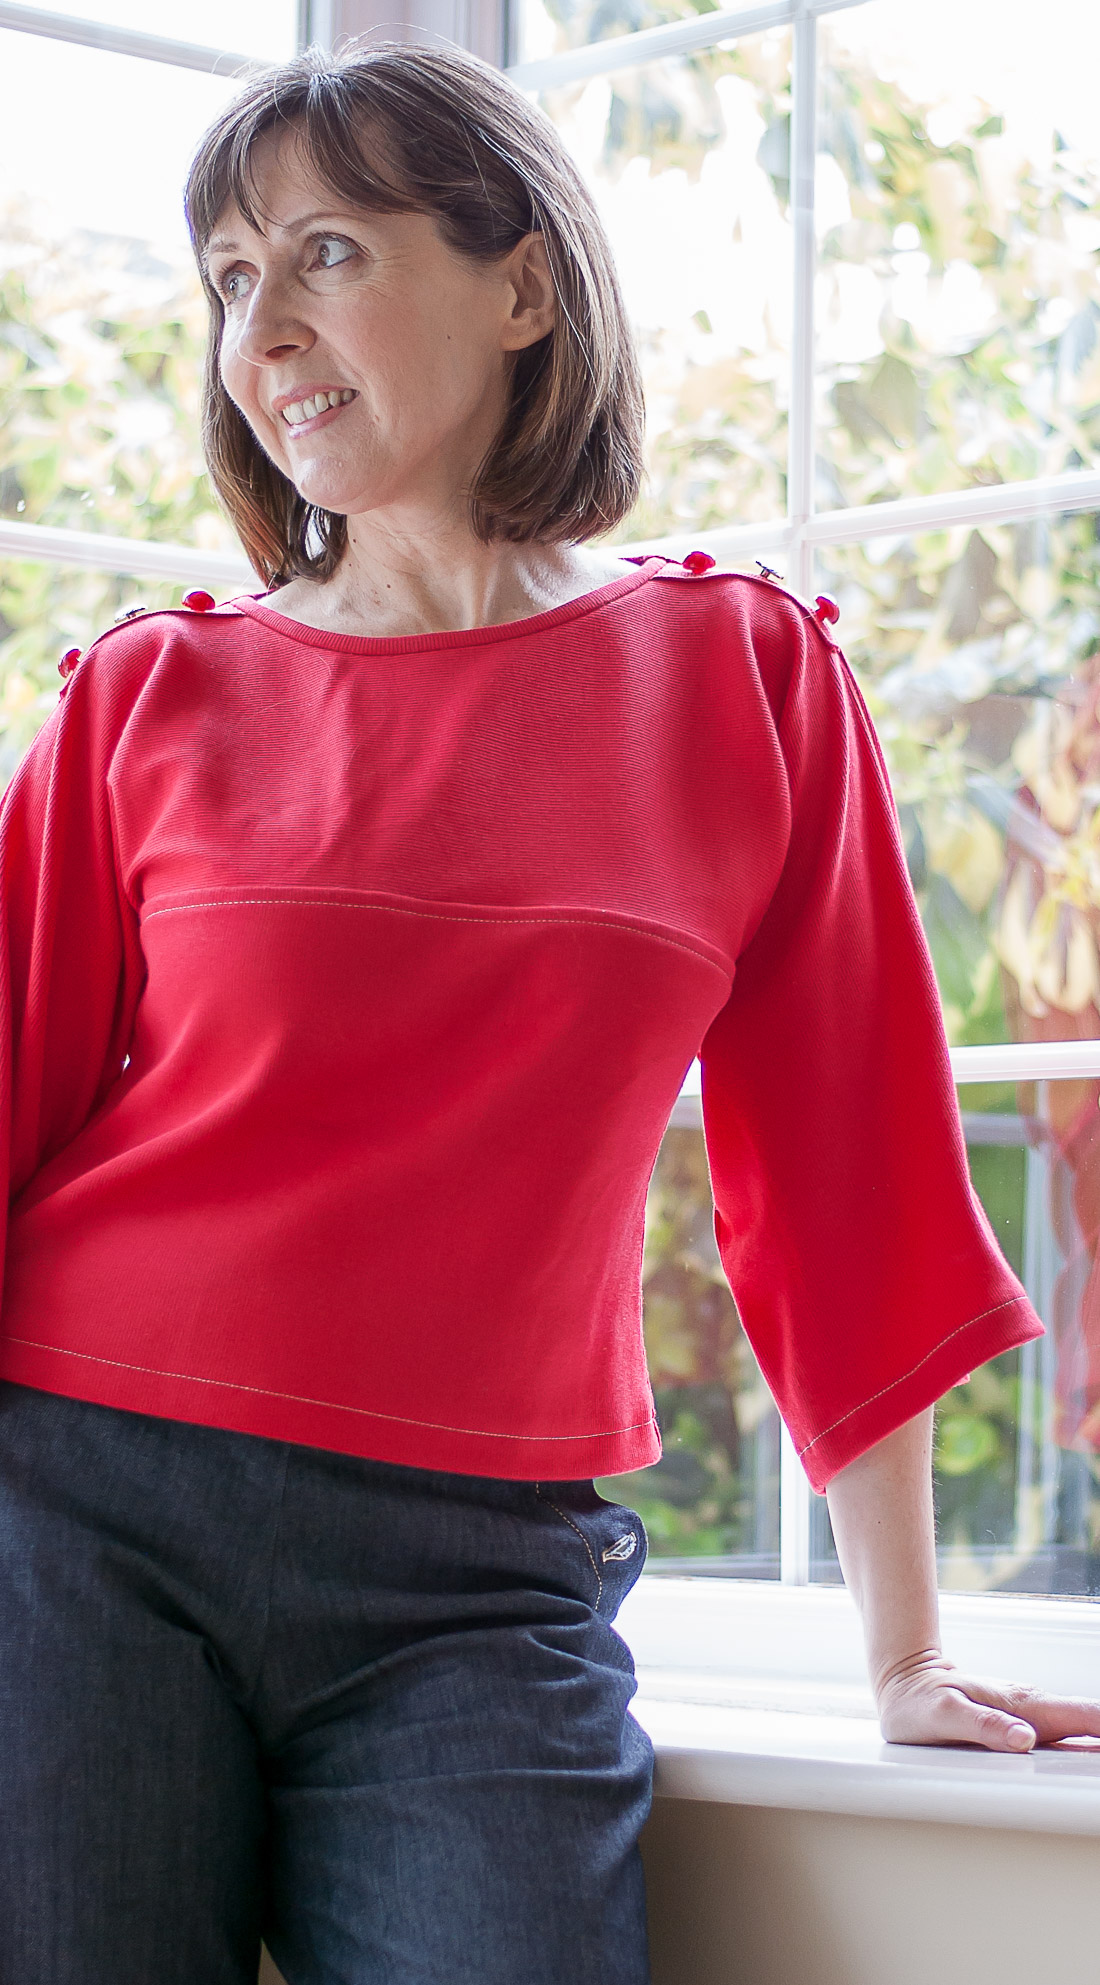 BurdaStyle year round-up: Top With Oversized Sleeves